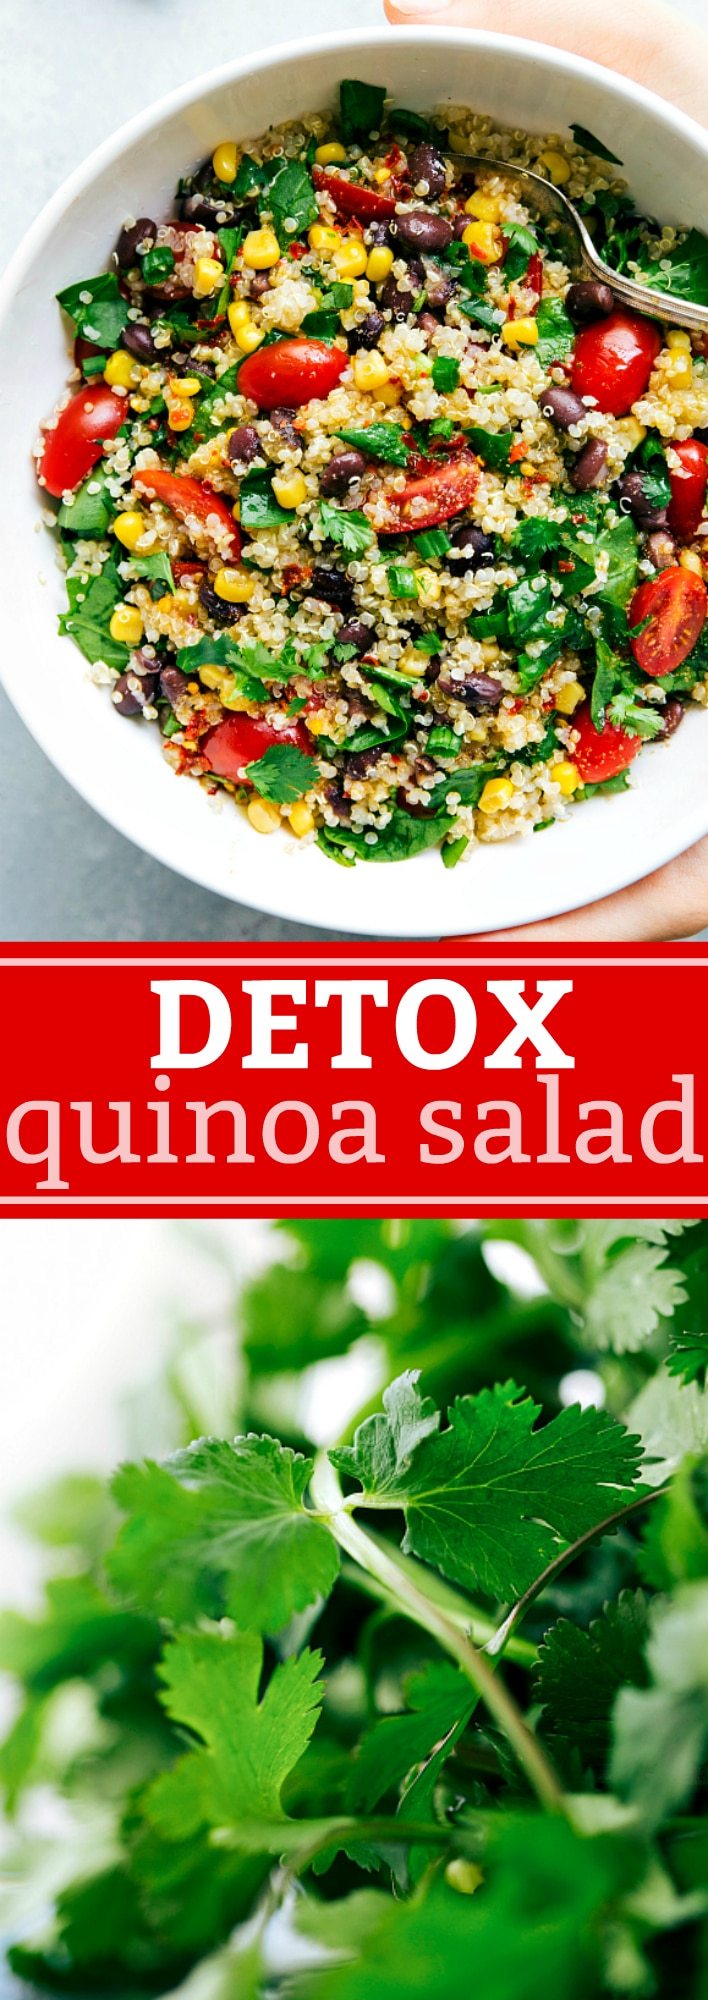 The best DETOX quinoa salad -- such healthy and delicious ingredients that are so good for you and help detox your body. Recipe from chelseasmessyapron.com